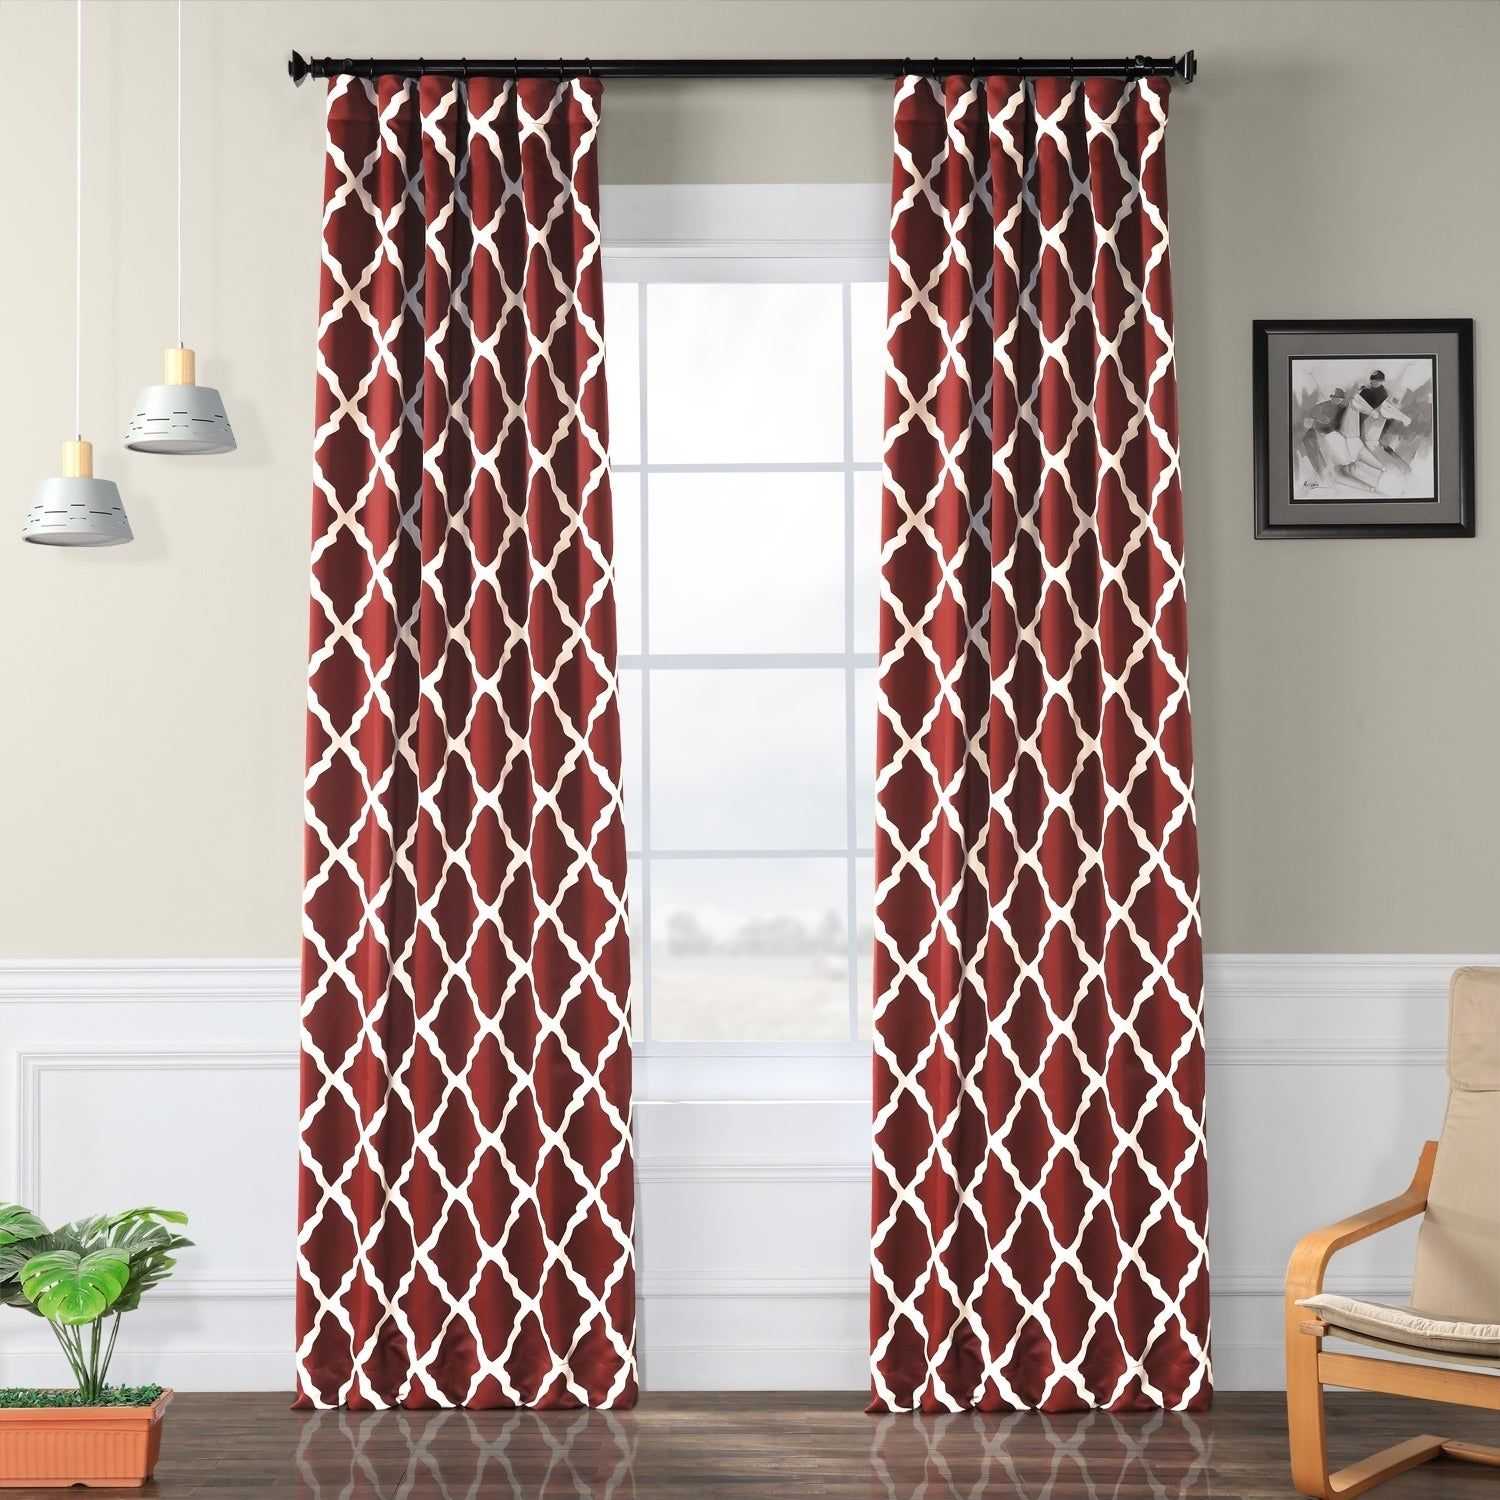 Details About Exclusive Fabrics Trellise Print Blackout Curtain Panel Pair Throughout Abstract Blackout Curtain Panel Pairs (View 14 of 22)